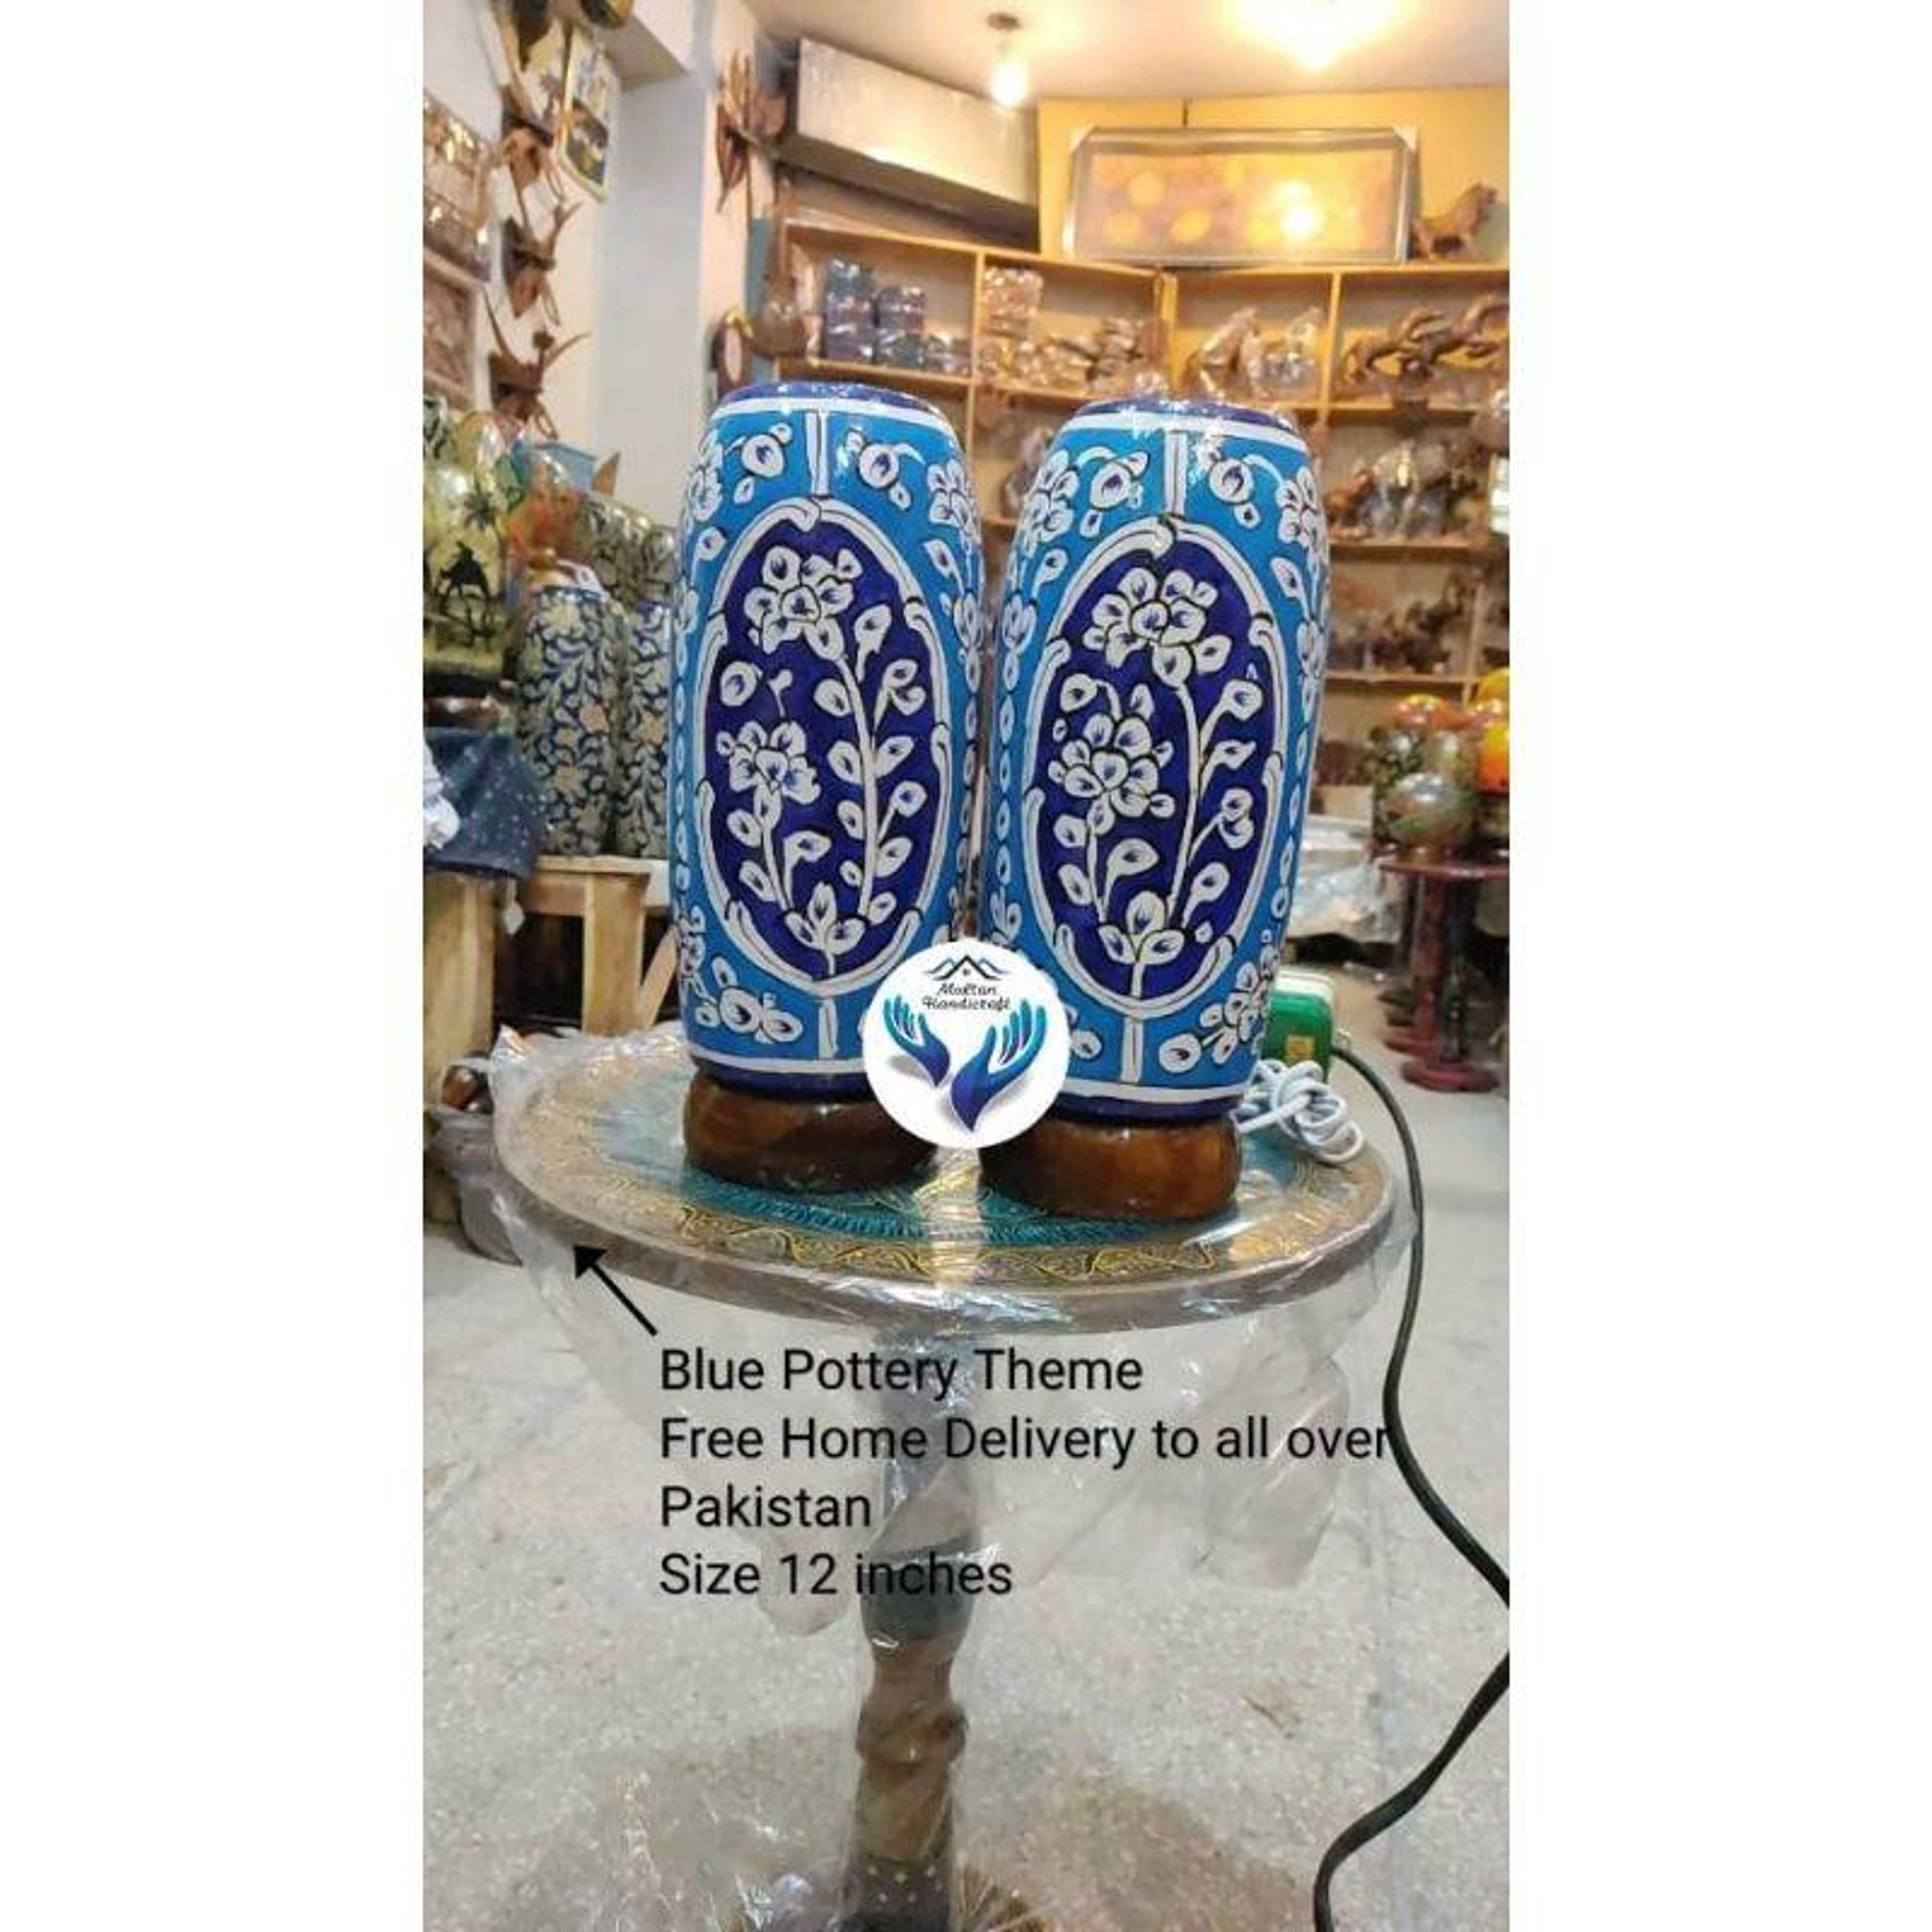 Blue Pottery Themed Table Lamps, 12 inch size